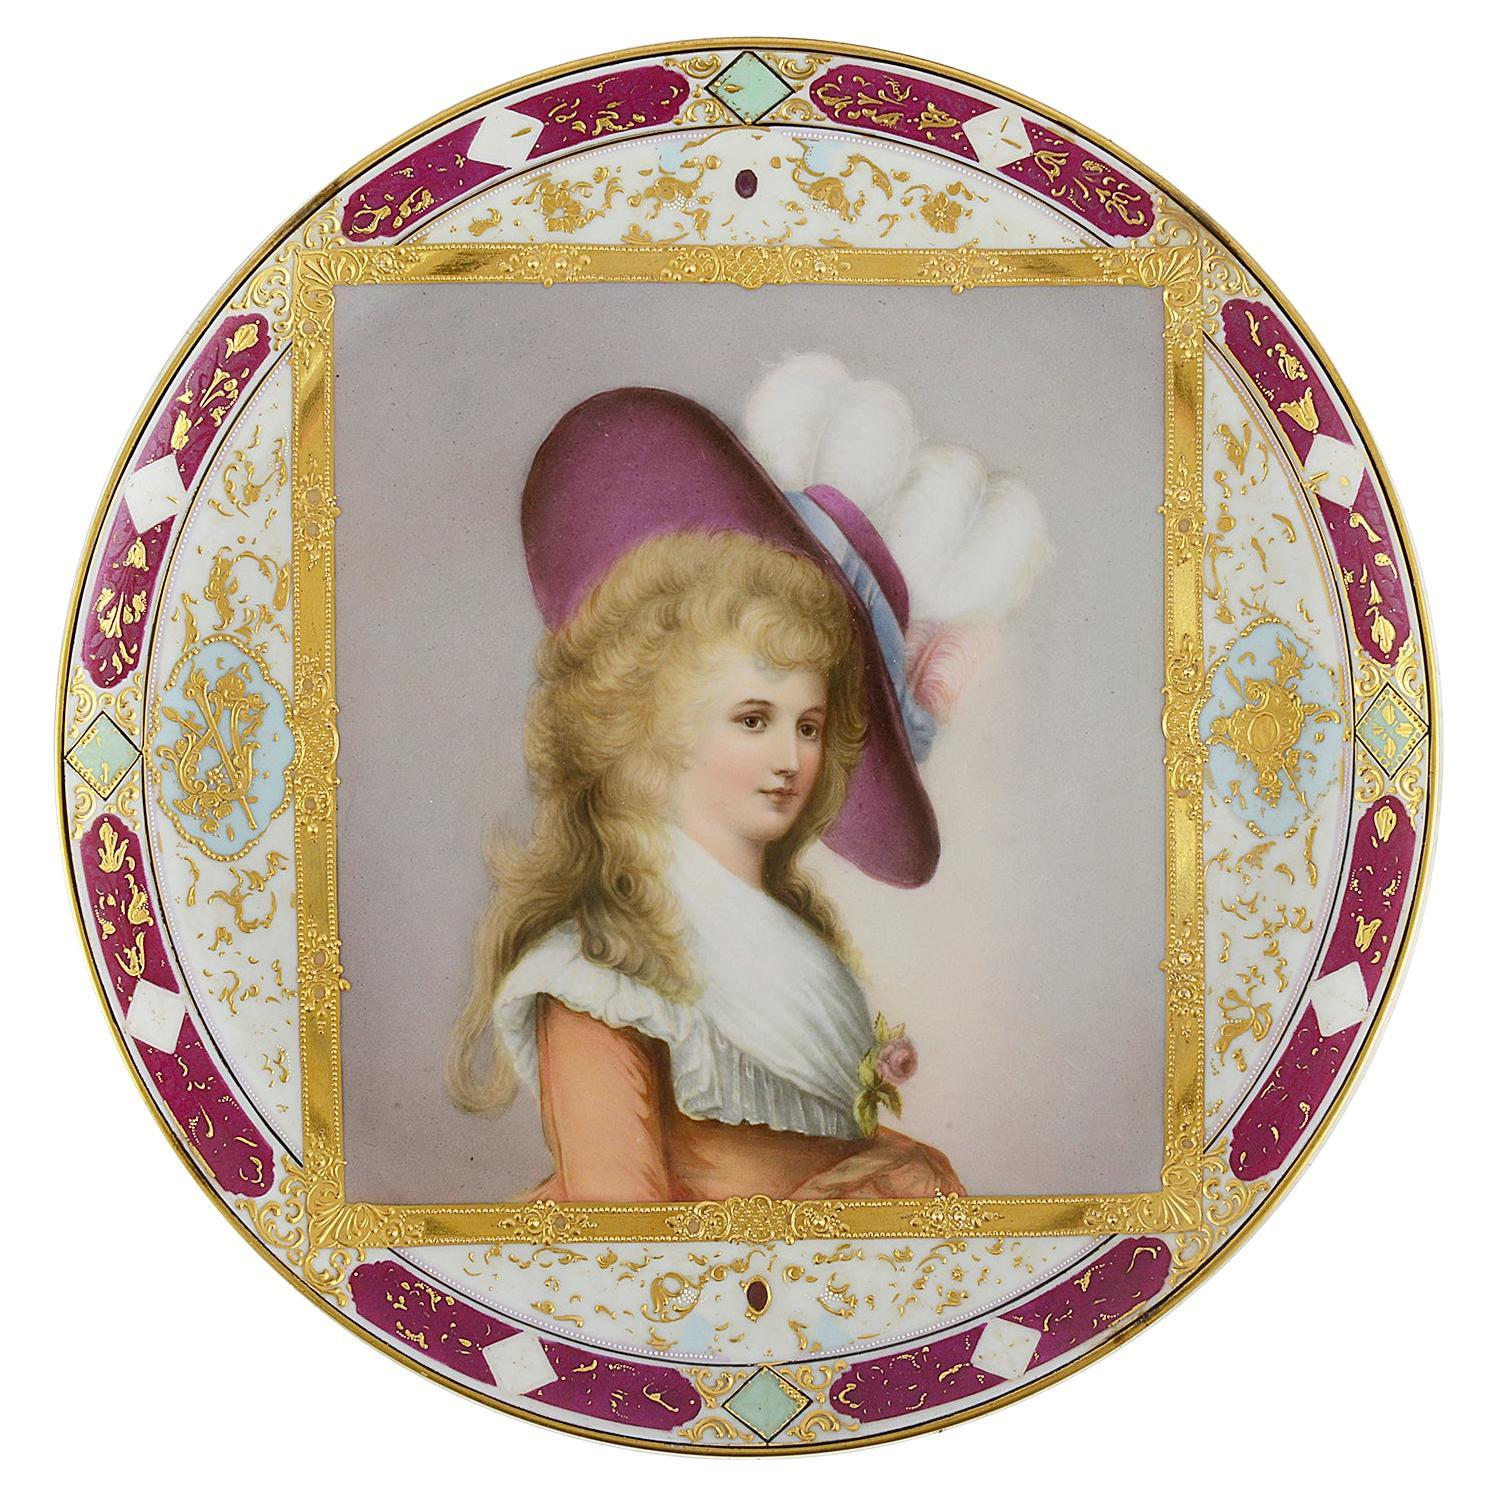 Late 19th Century Vienna Style Porcelain Plate, Depicting Duchess of Devonshire For Sale